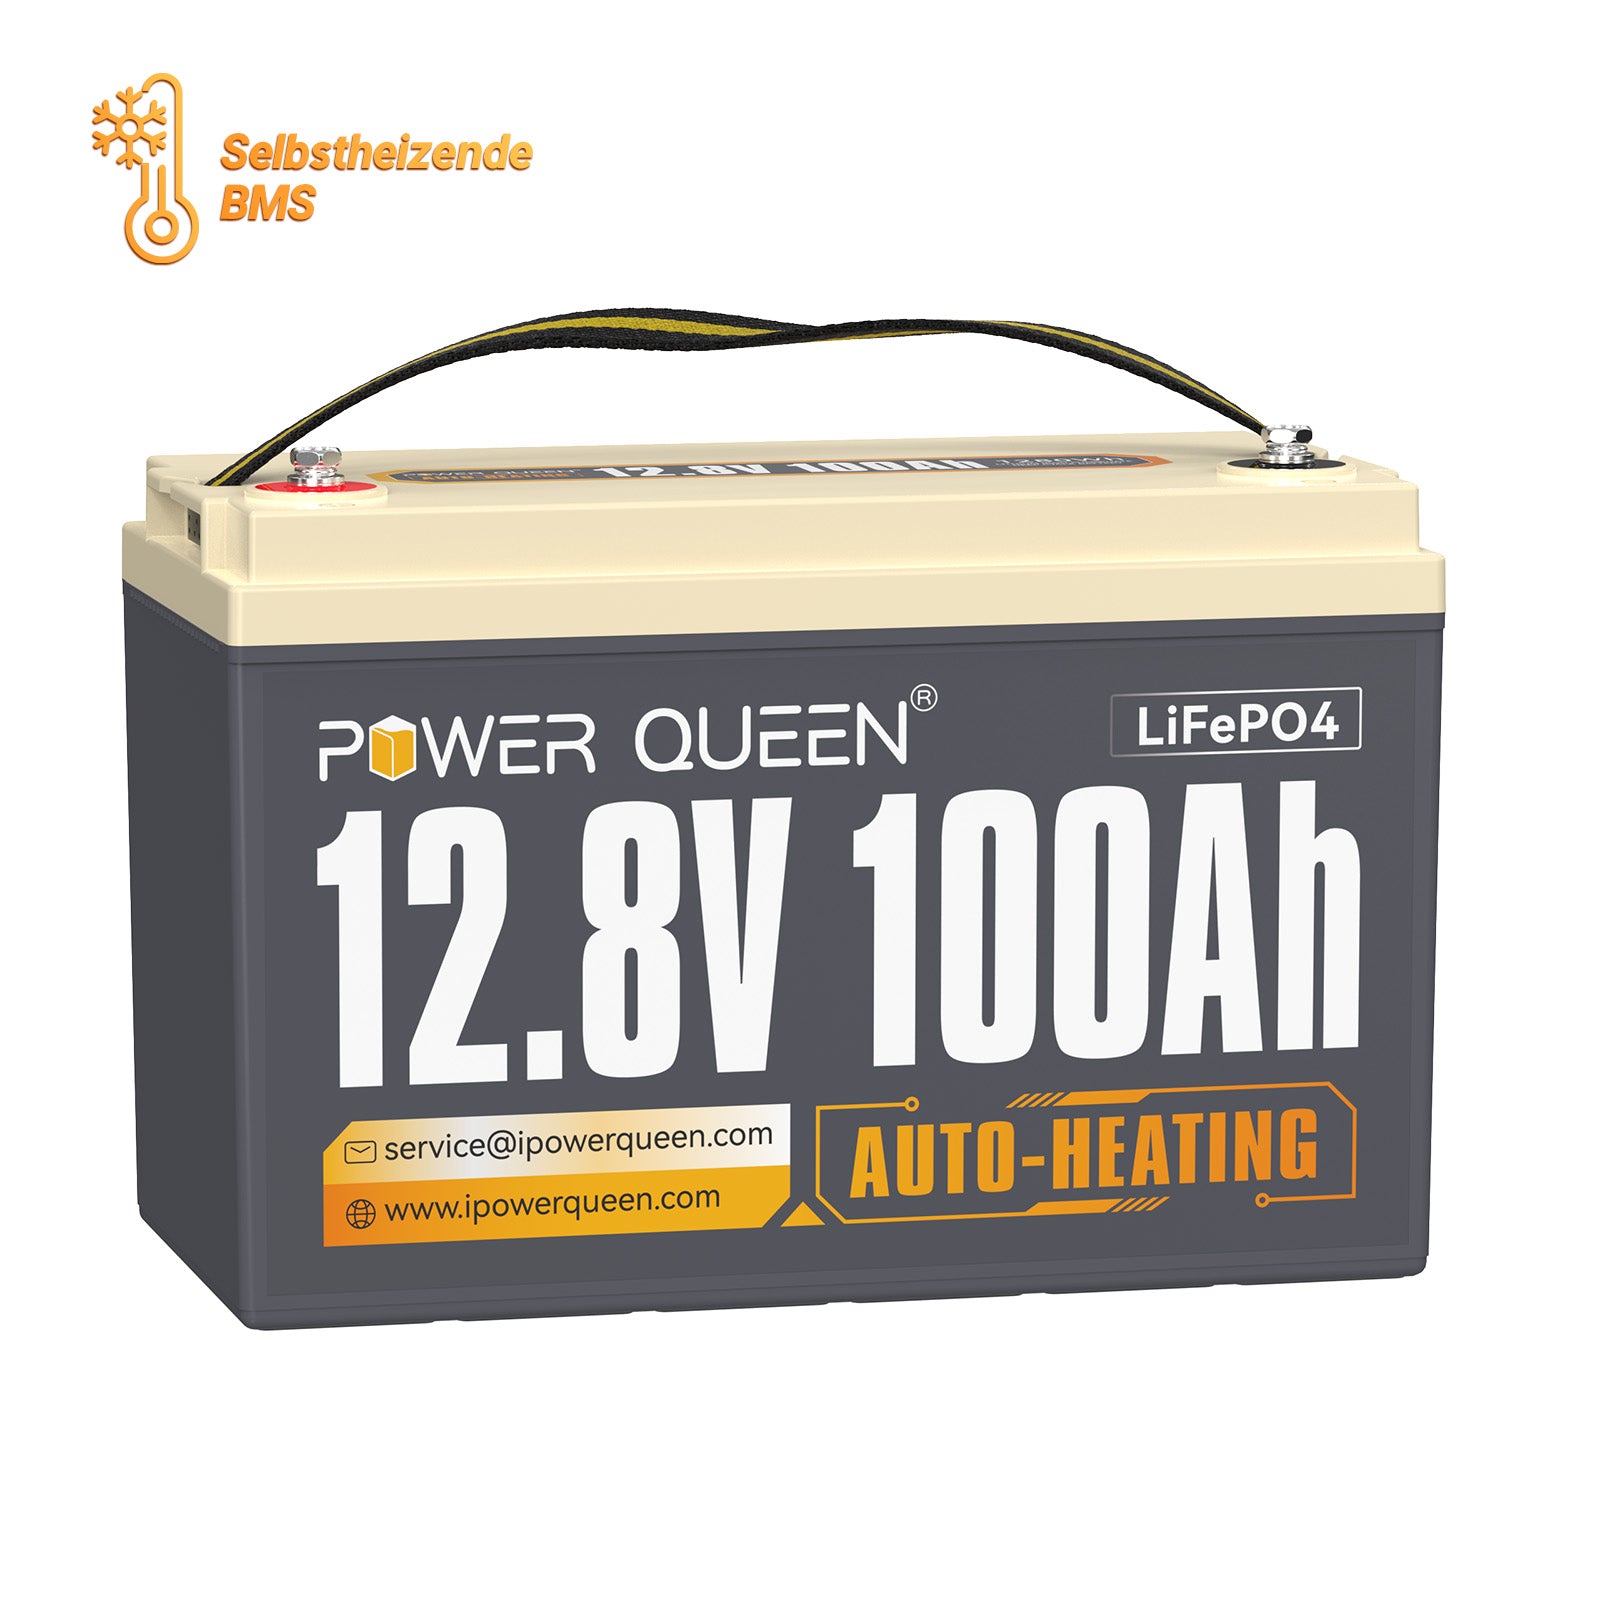 Power Queen 12V 100Ah Self-Heating LiFePO4 Battery, Built-in 100A BMS